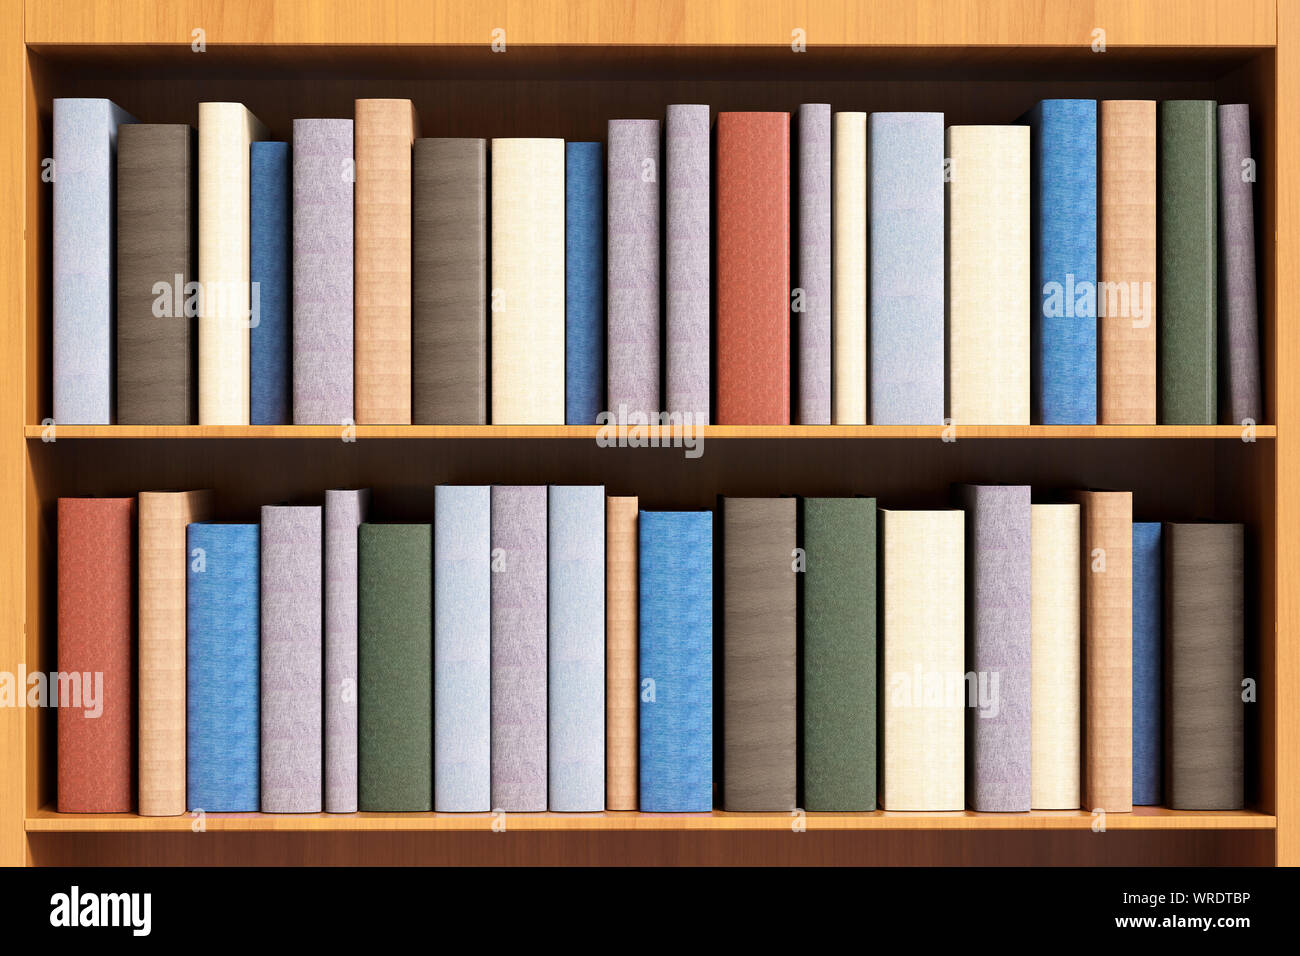 Wooden bookcase with two shelves full of hardback books with blank spines Stock Photo